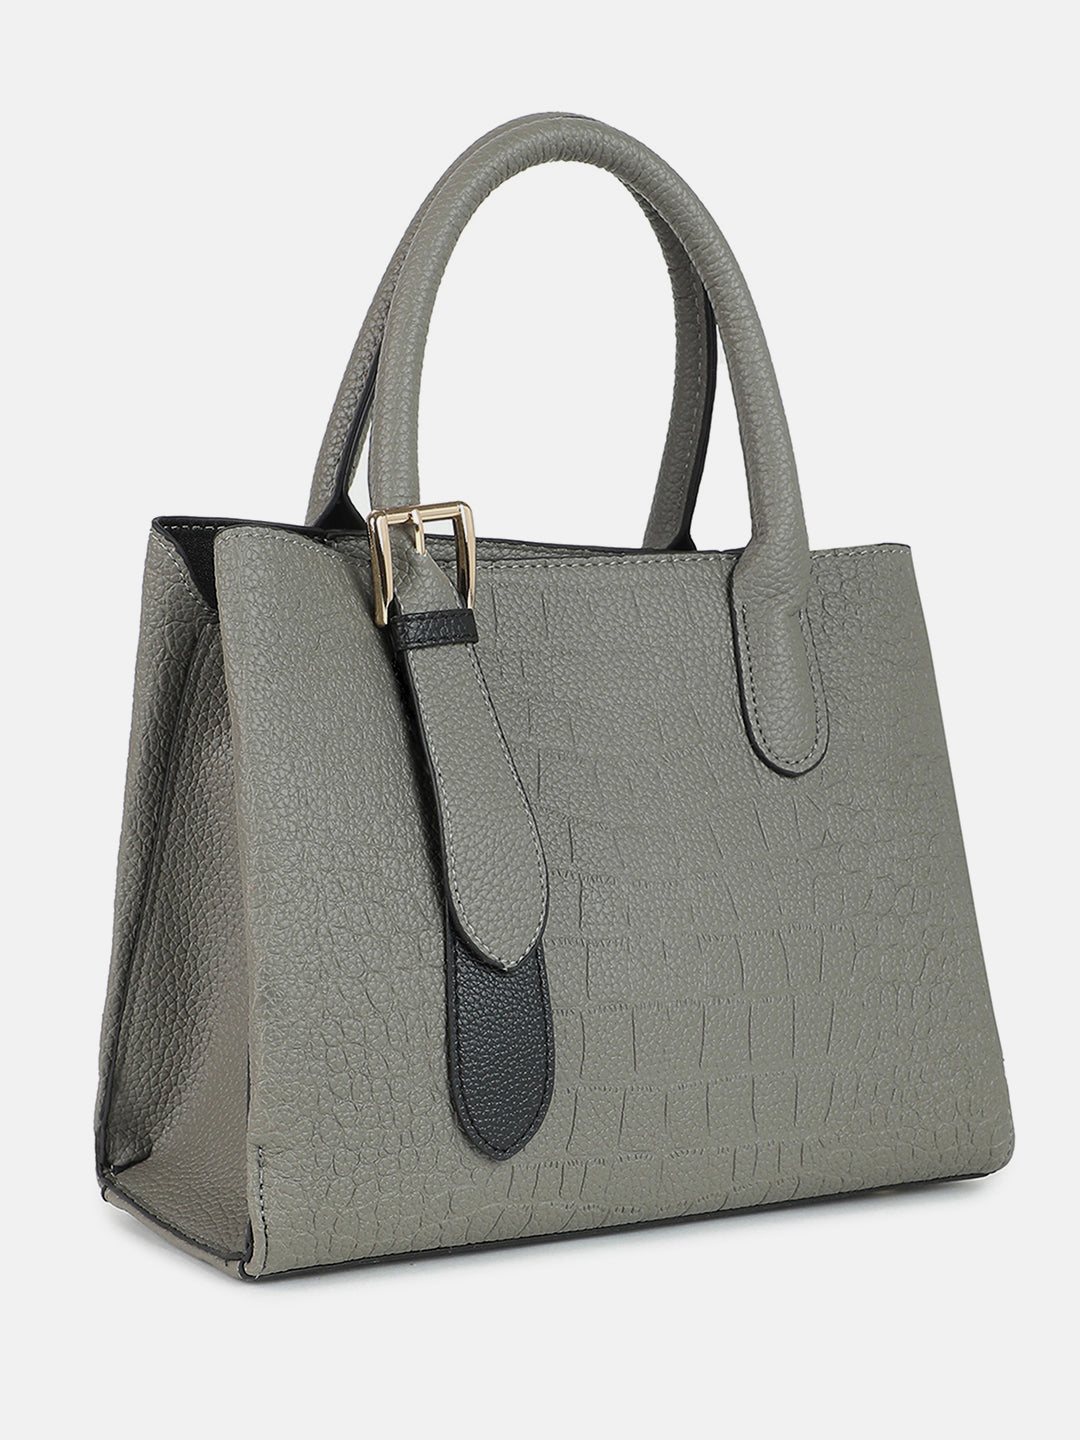 Stormy Structure Grey Tote Bag